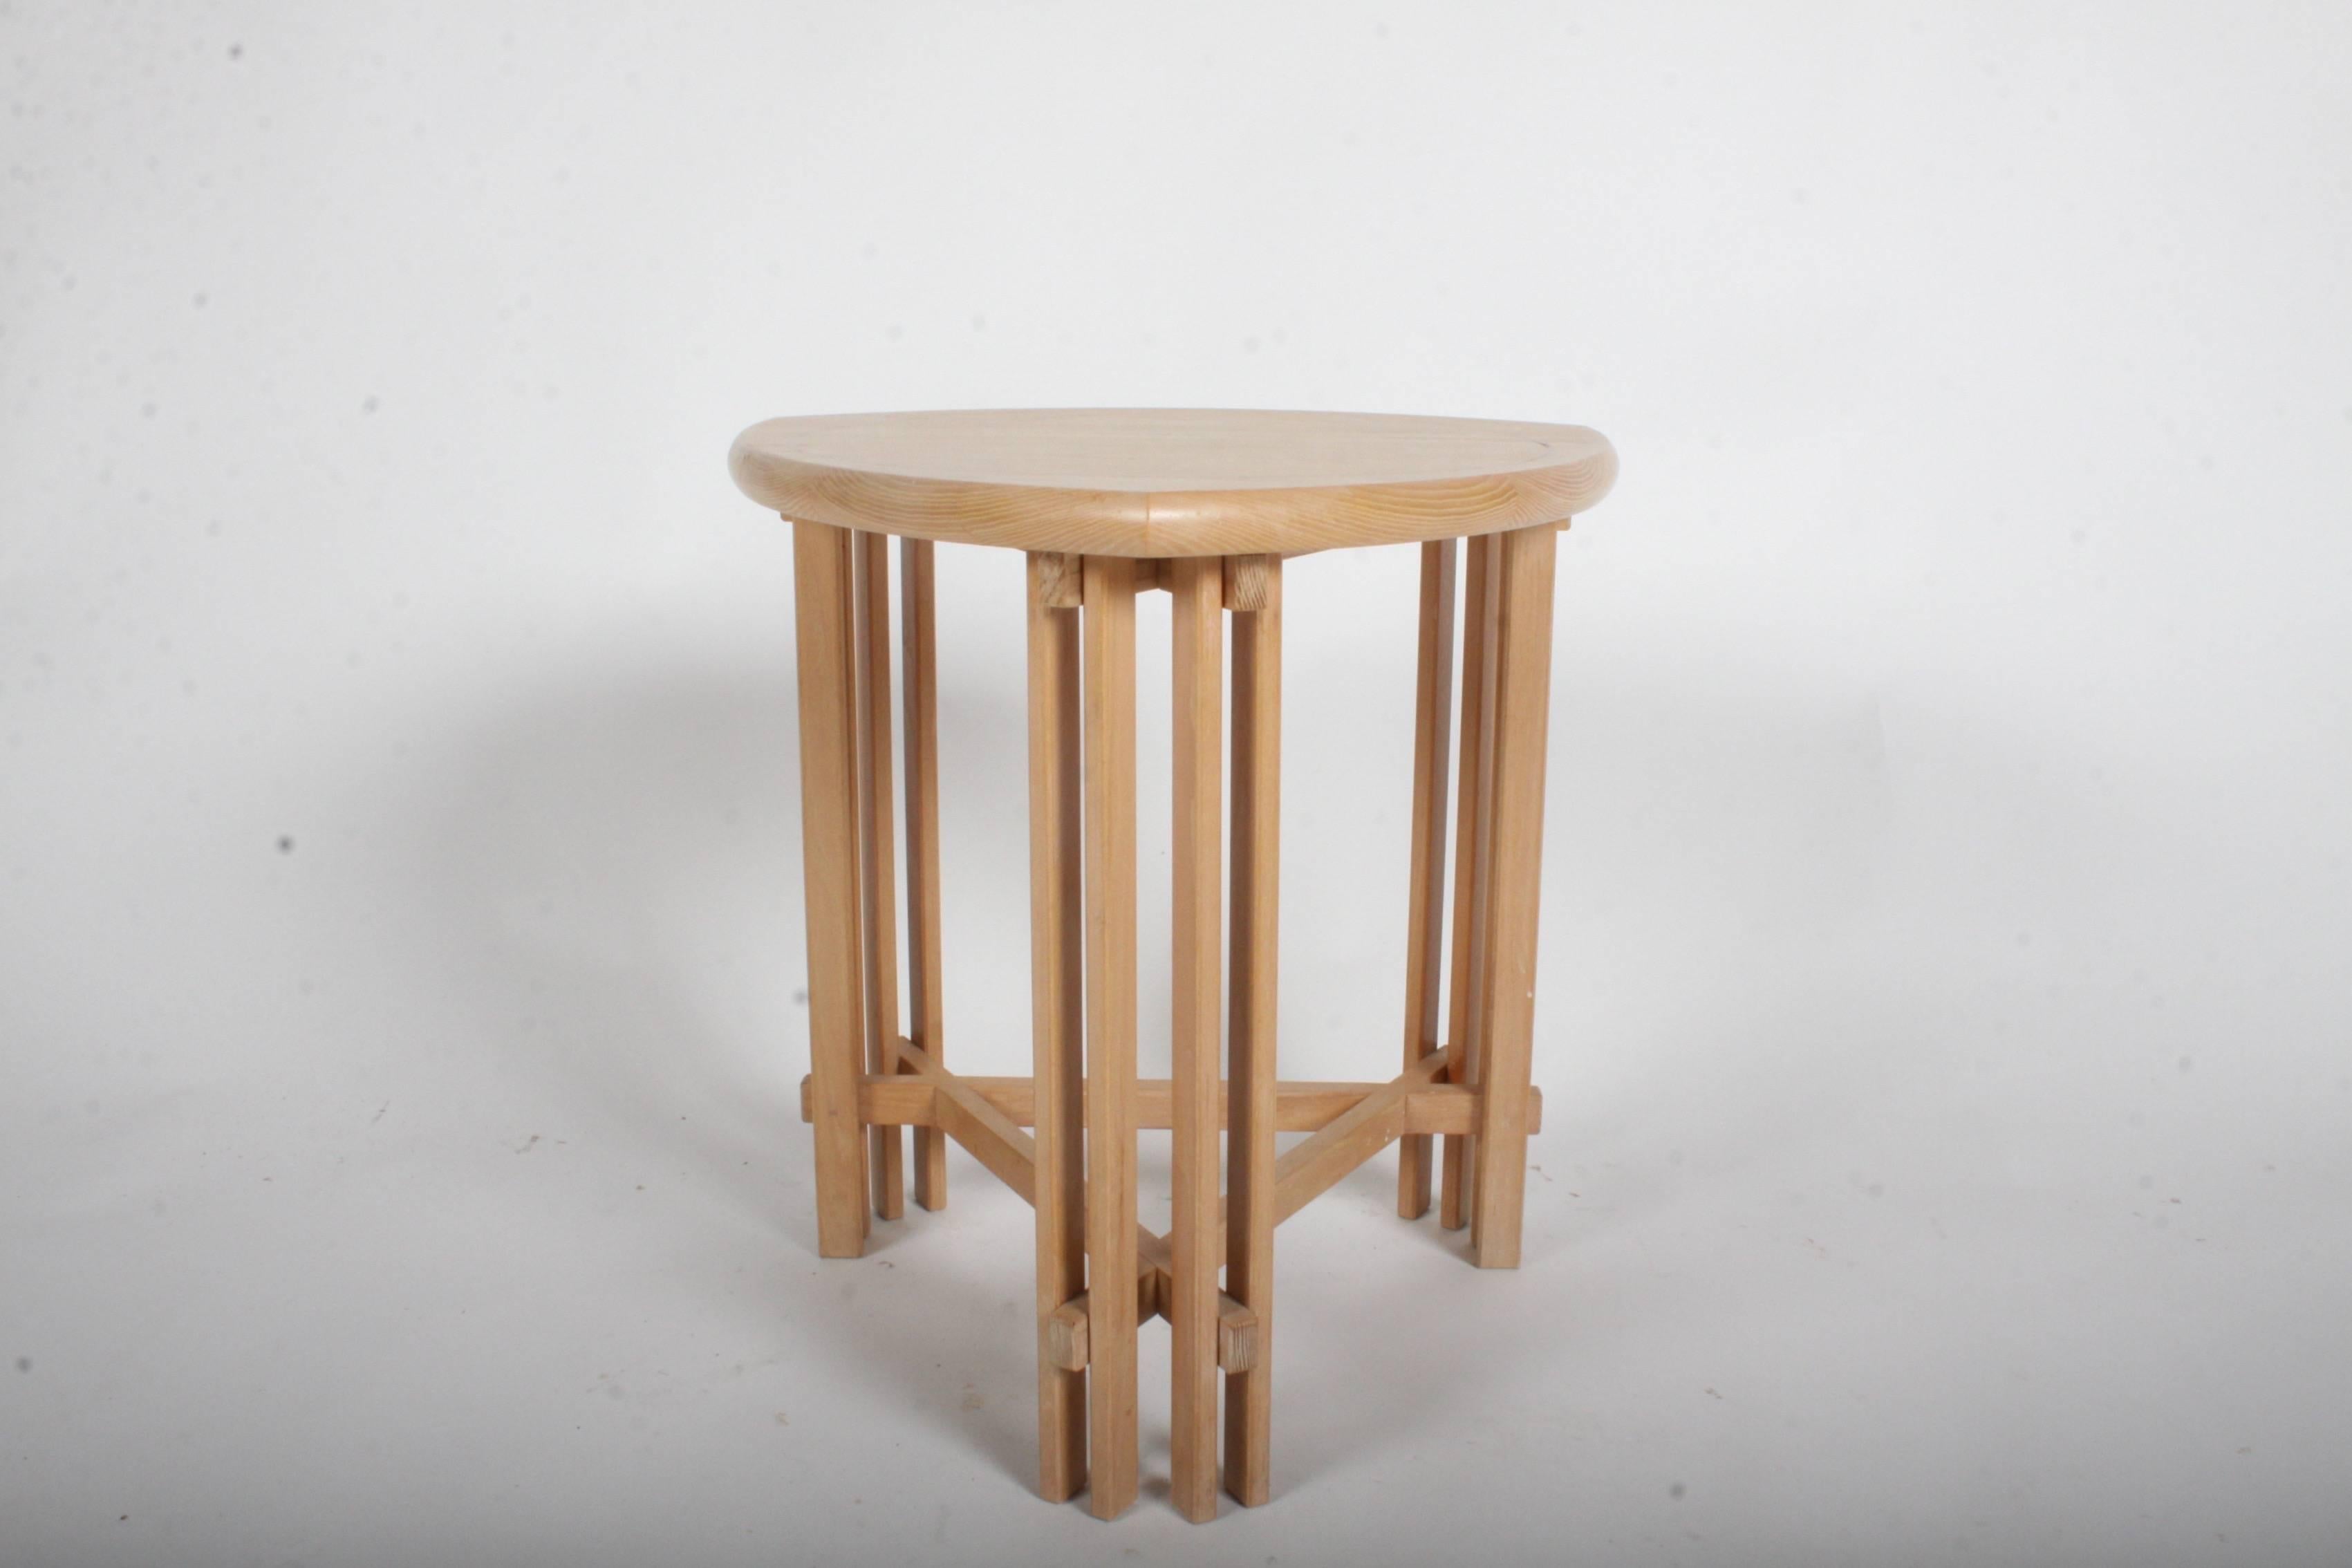 Pair of Gregg Lipton Prairie School style triangular side or end tables in ash with circular inlay. These tables were handcrafted by Gregg in his studio, signed and dated 1988. A Frank Lloyd Wright influenced design. Contemporary of Thomas Moser.